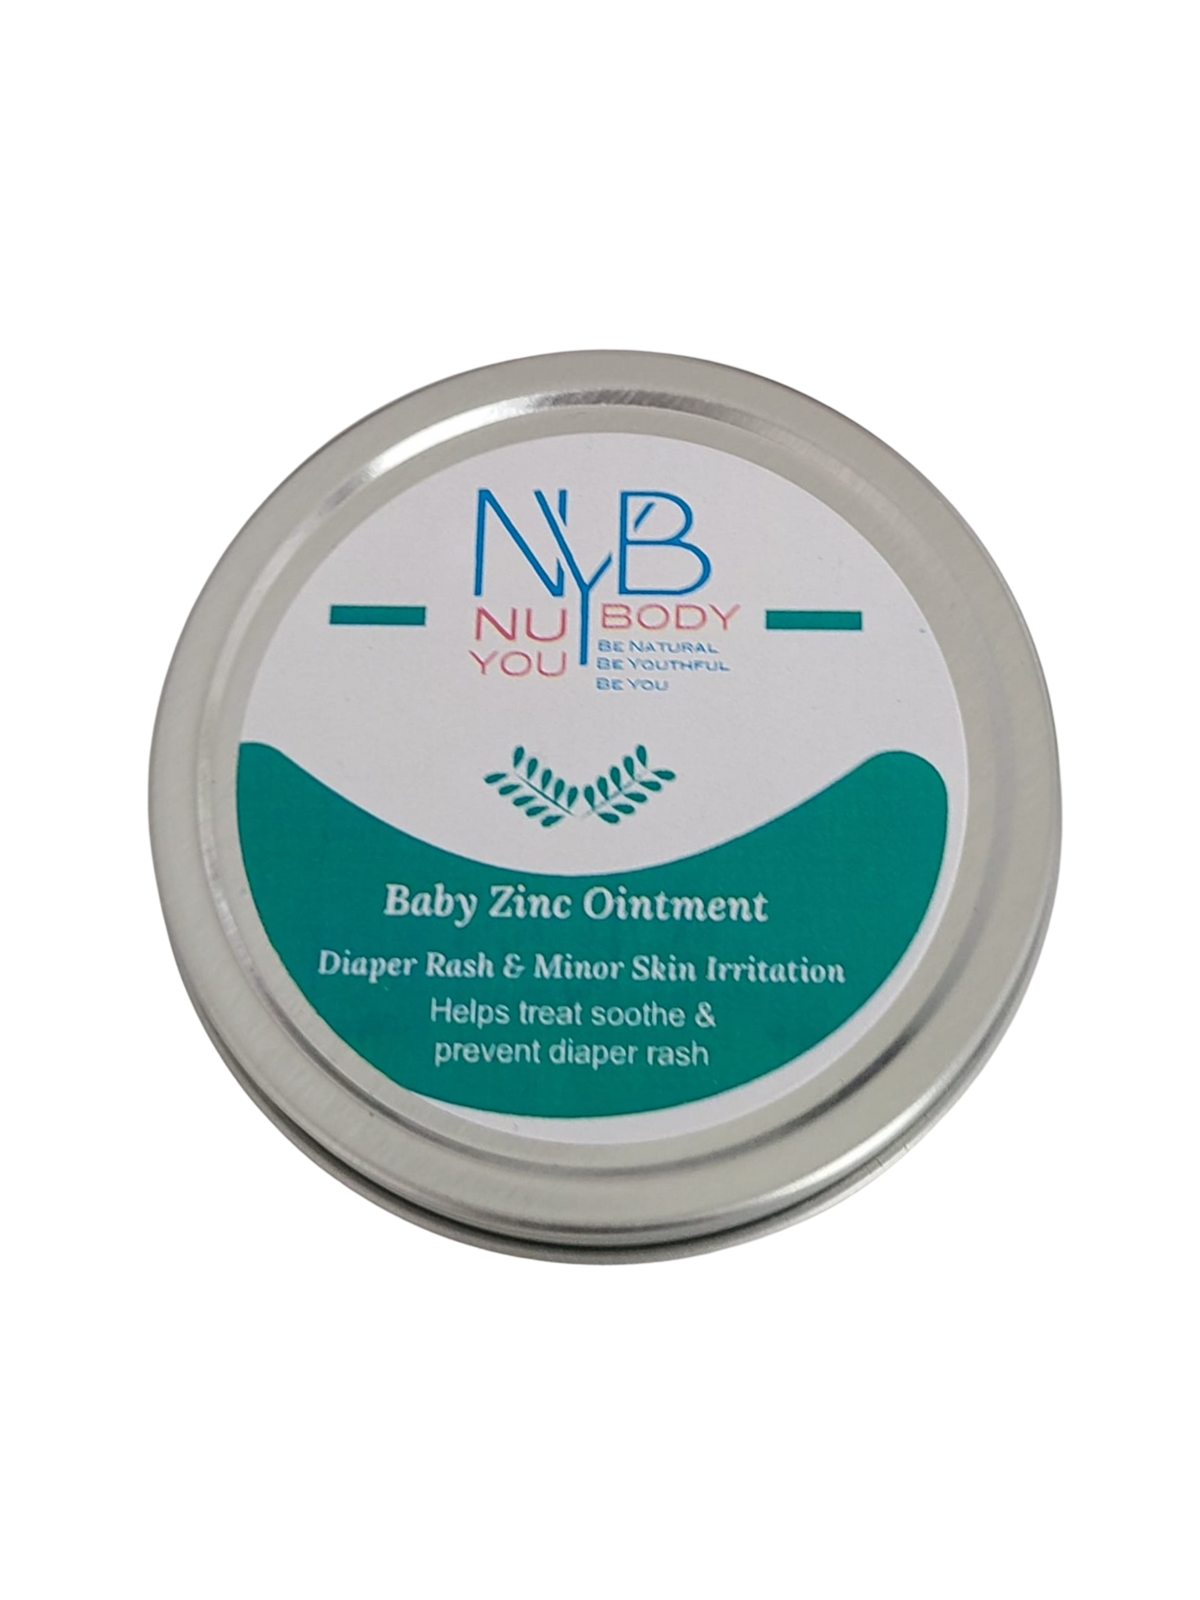 Baby Zinc Ointment